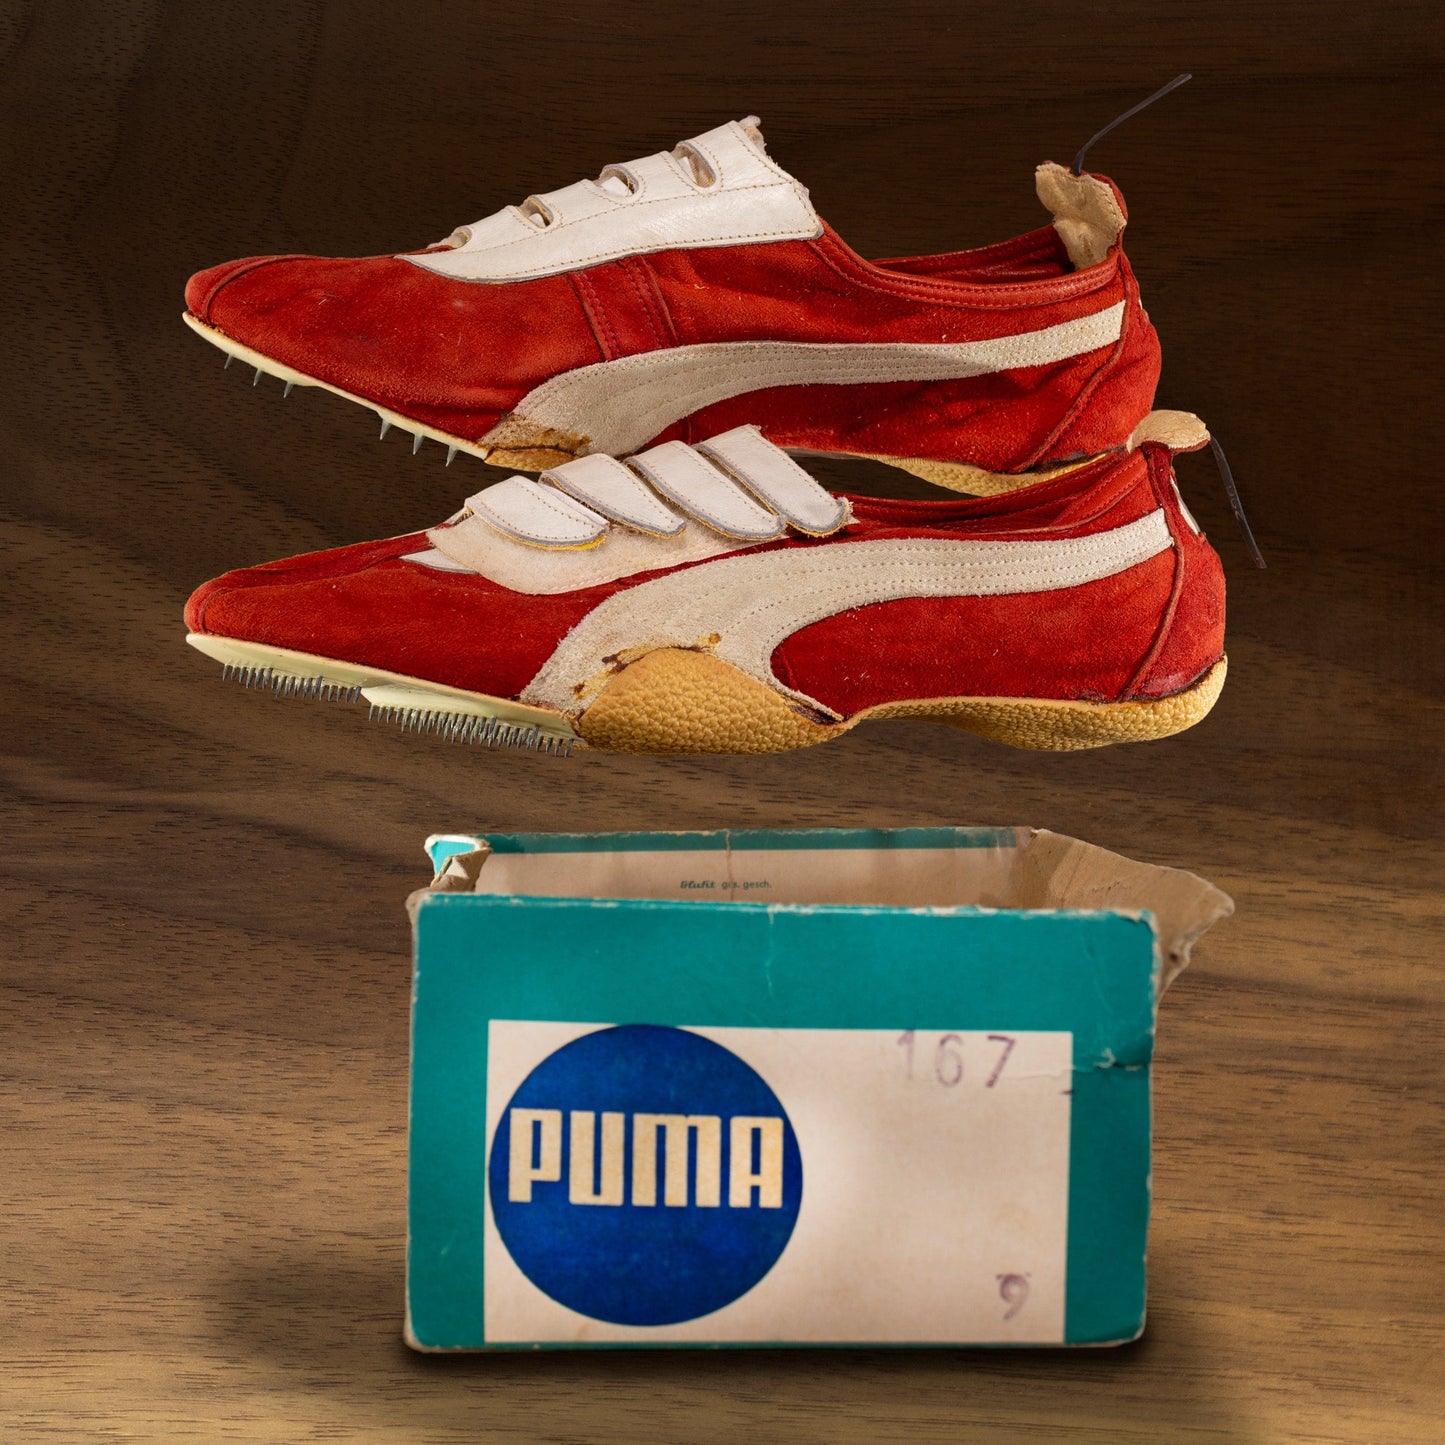 1968 Puma Brush Shoes Hovering